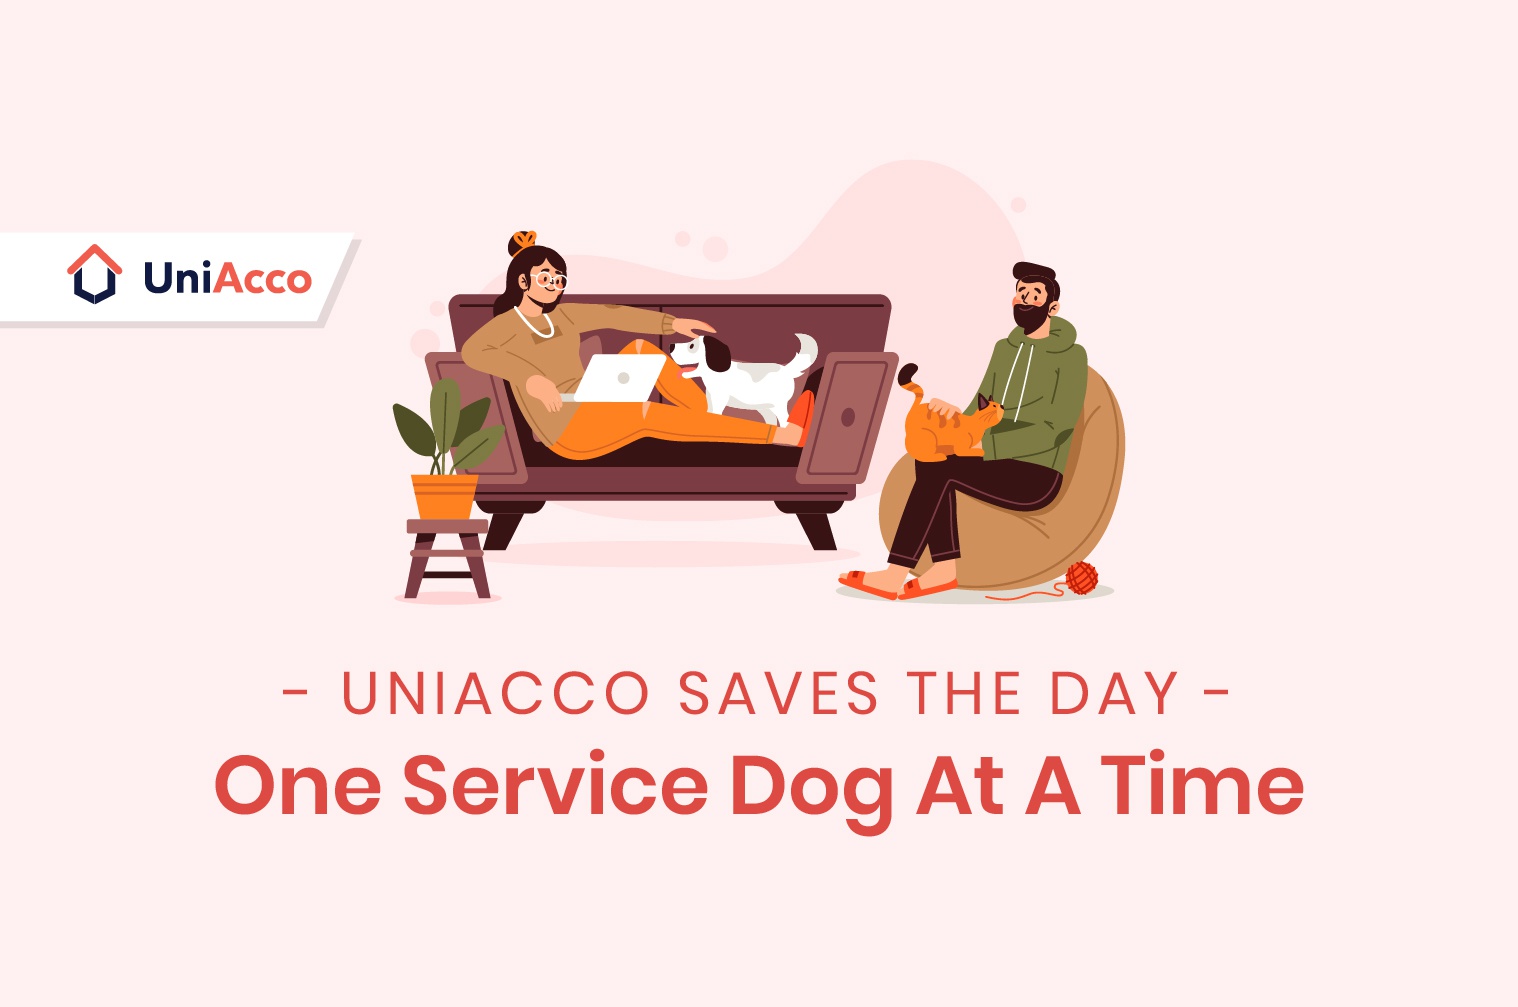 UniAcco Saves The Day - One Service Dog At A Time